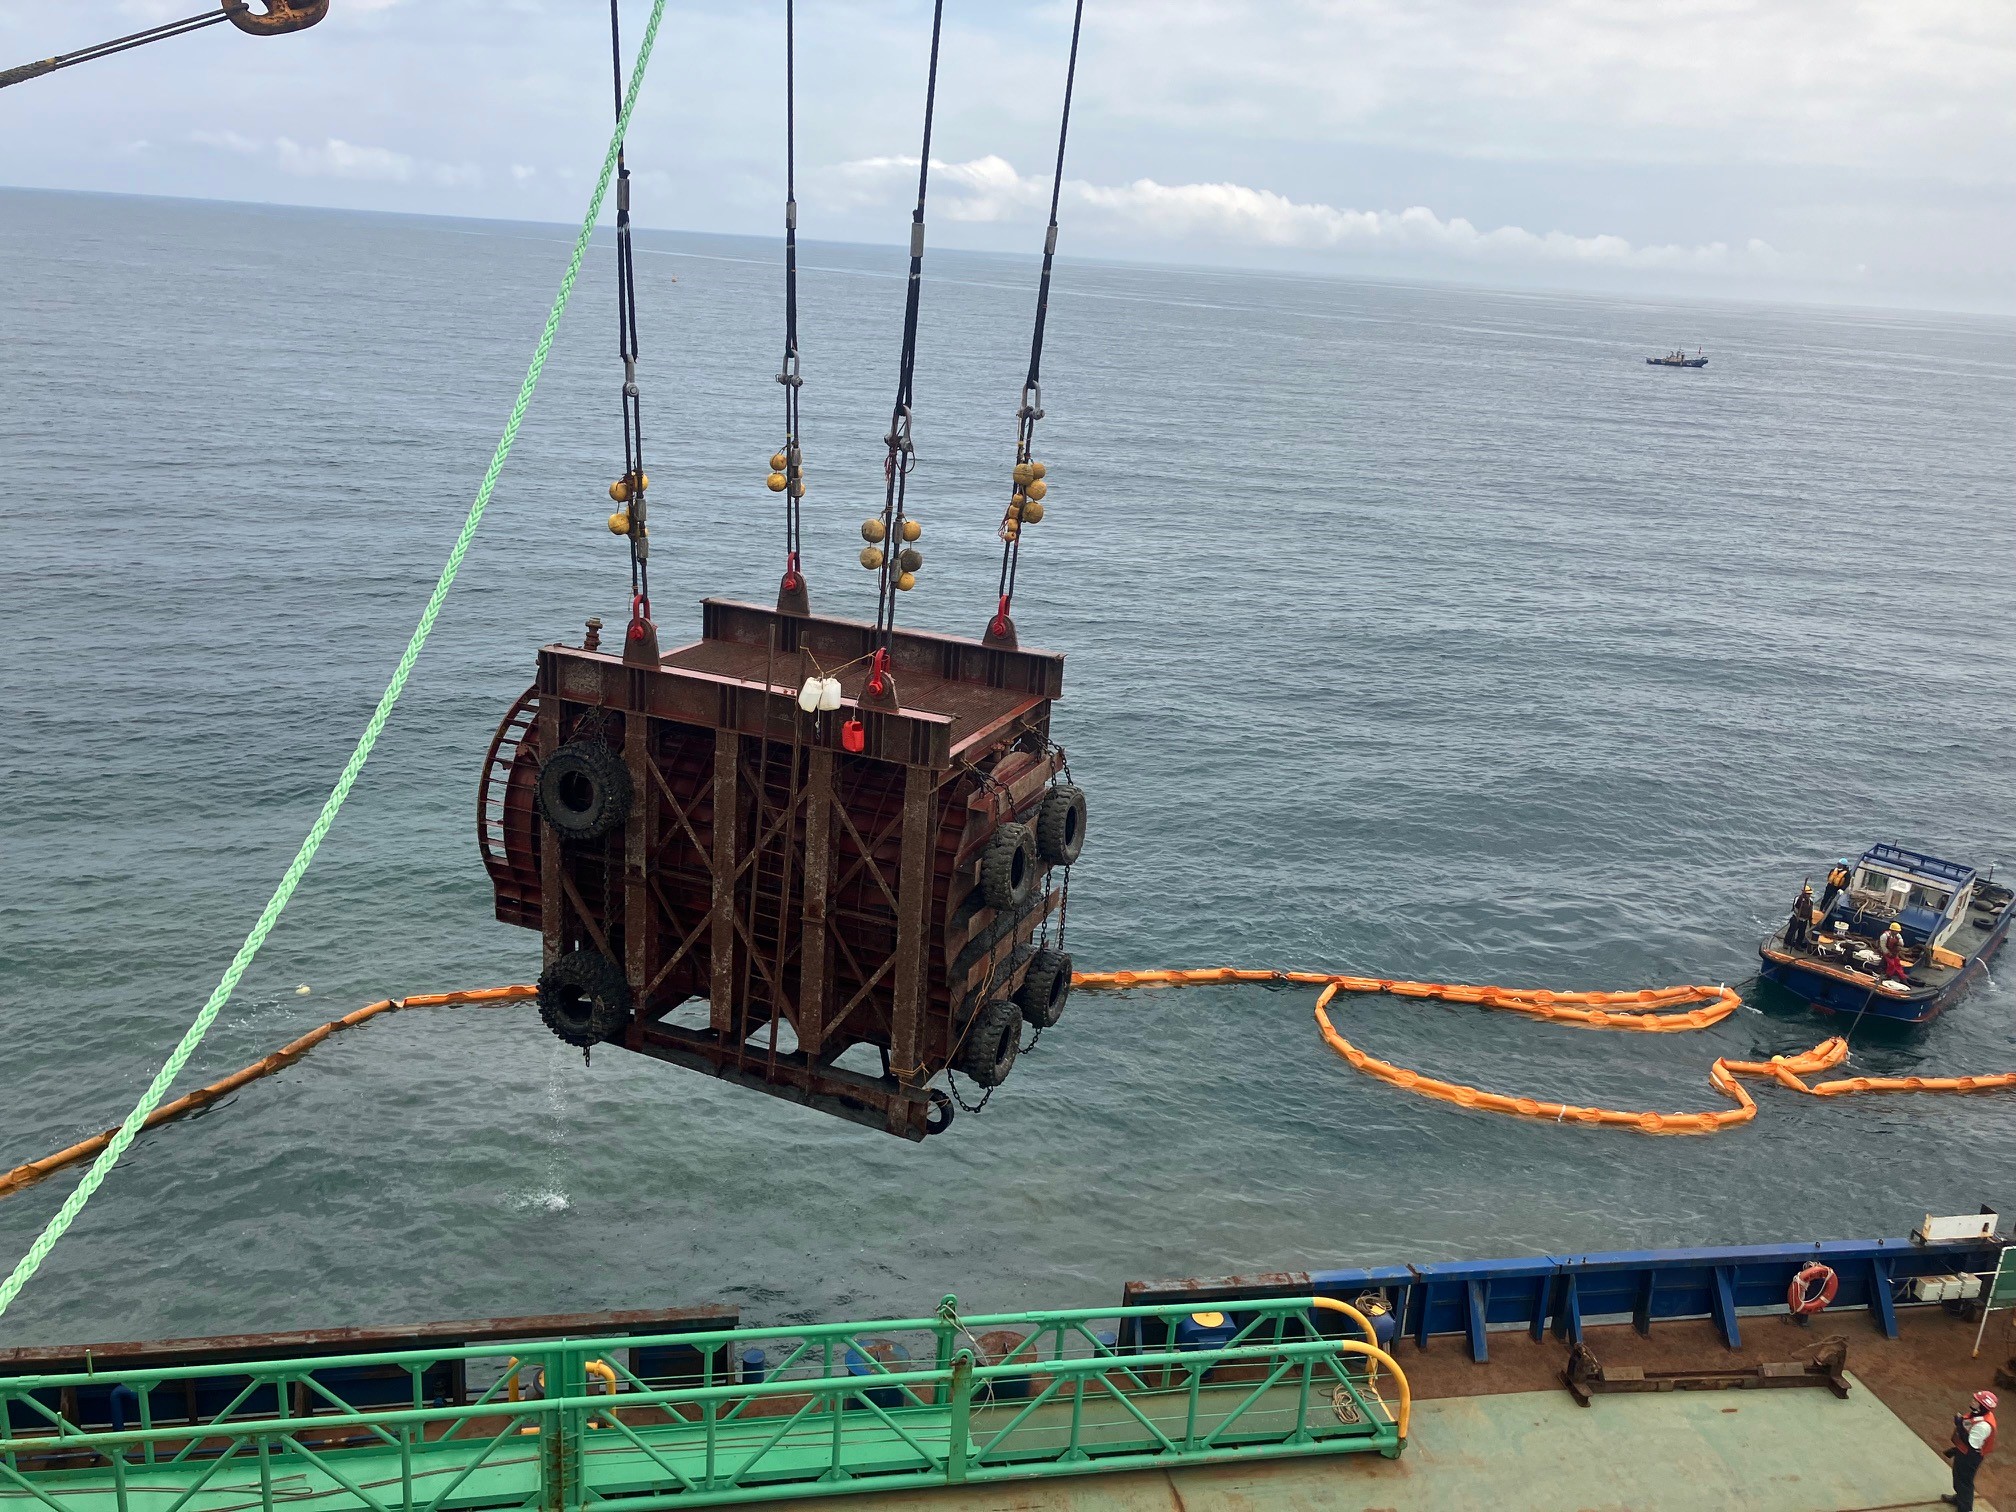 Work in removal of the shield arrival tube and installation of the discharge outlet caisson upper lid